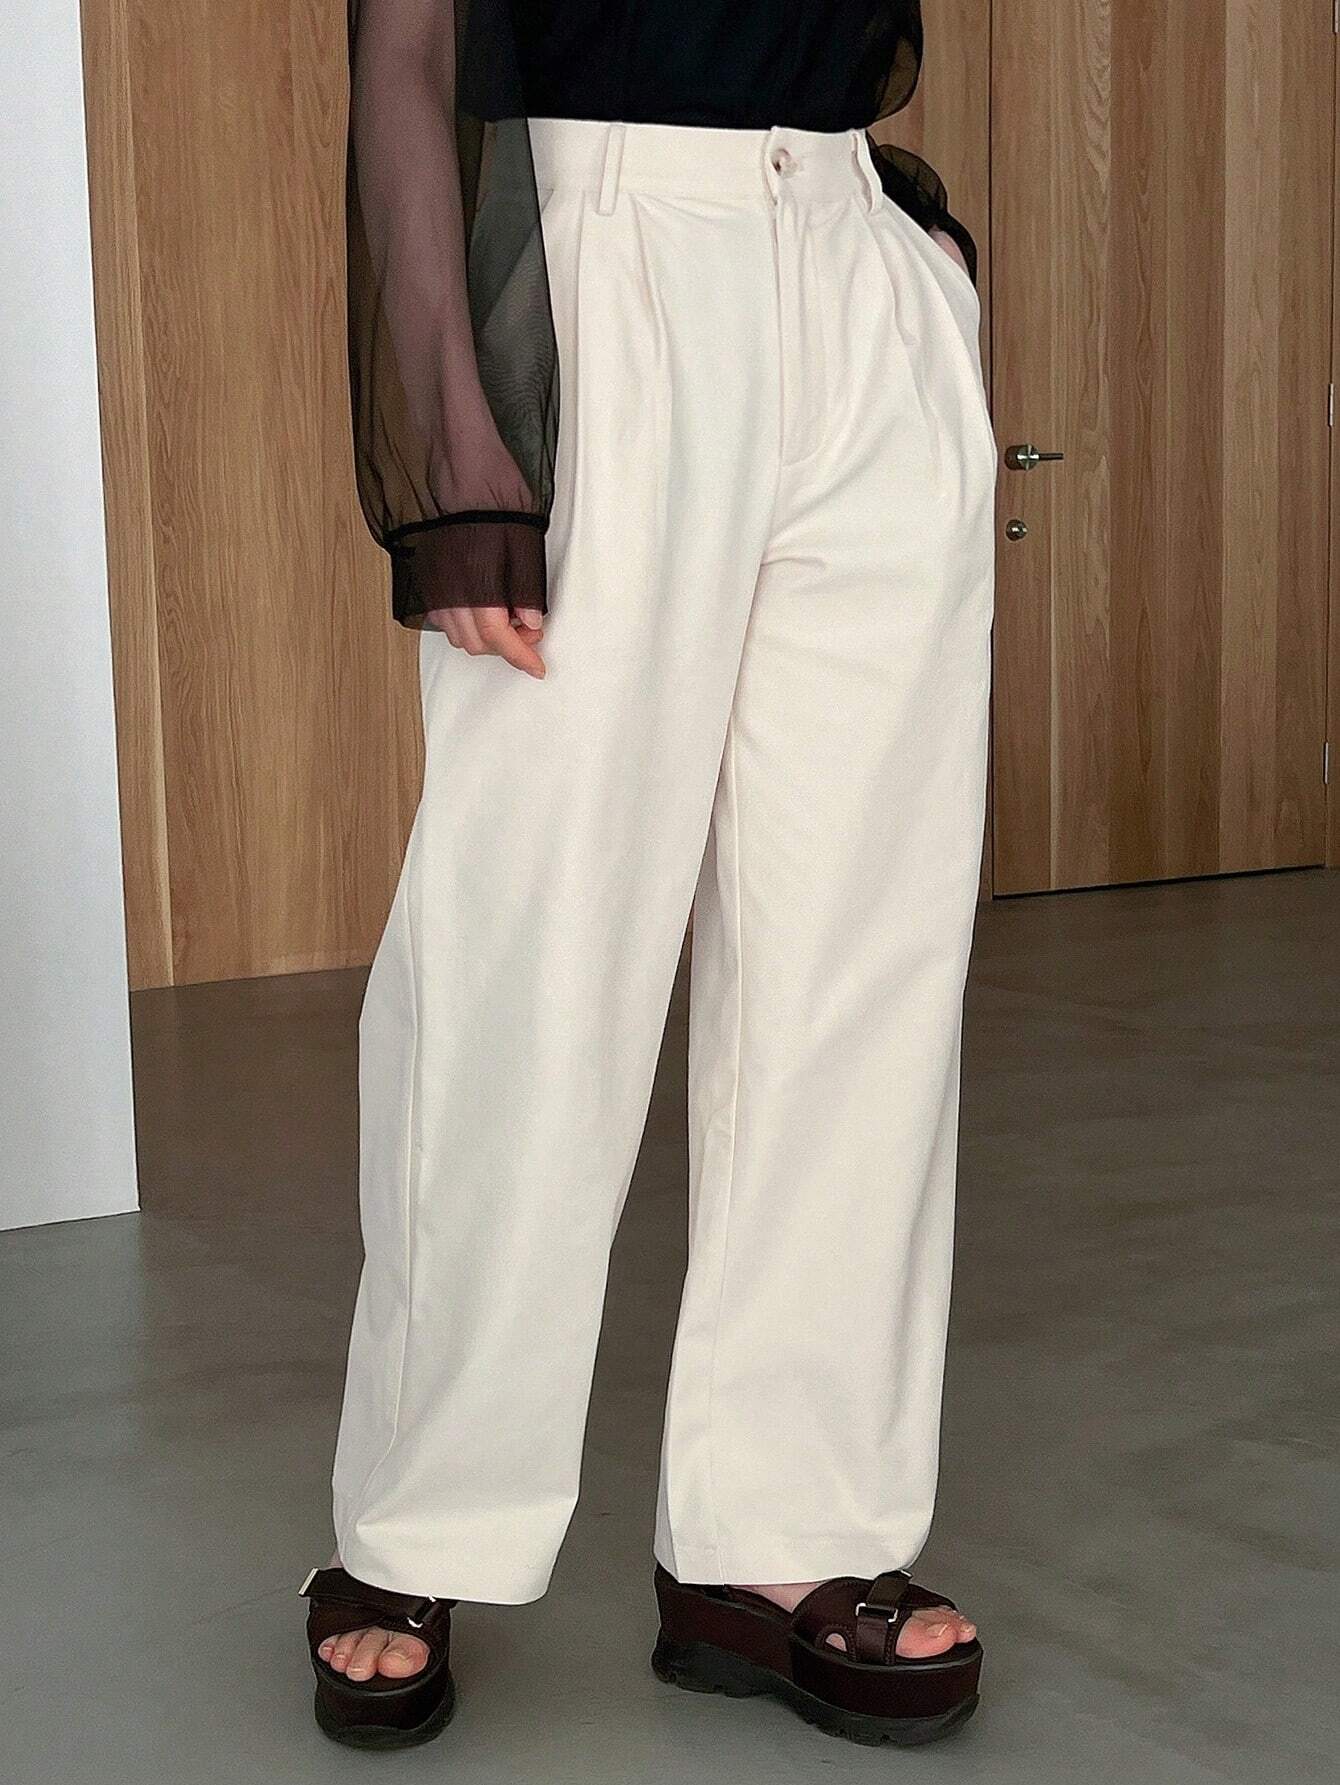 FRIFUL Designer Women's White Casual Pants With Pleats